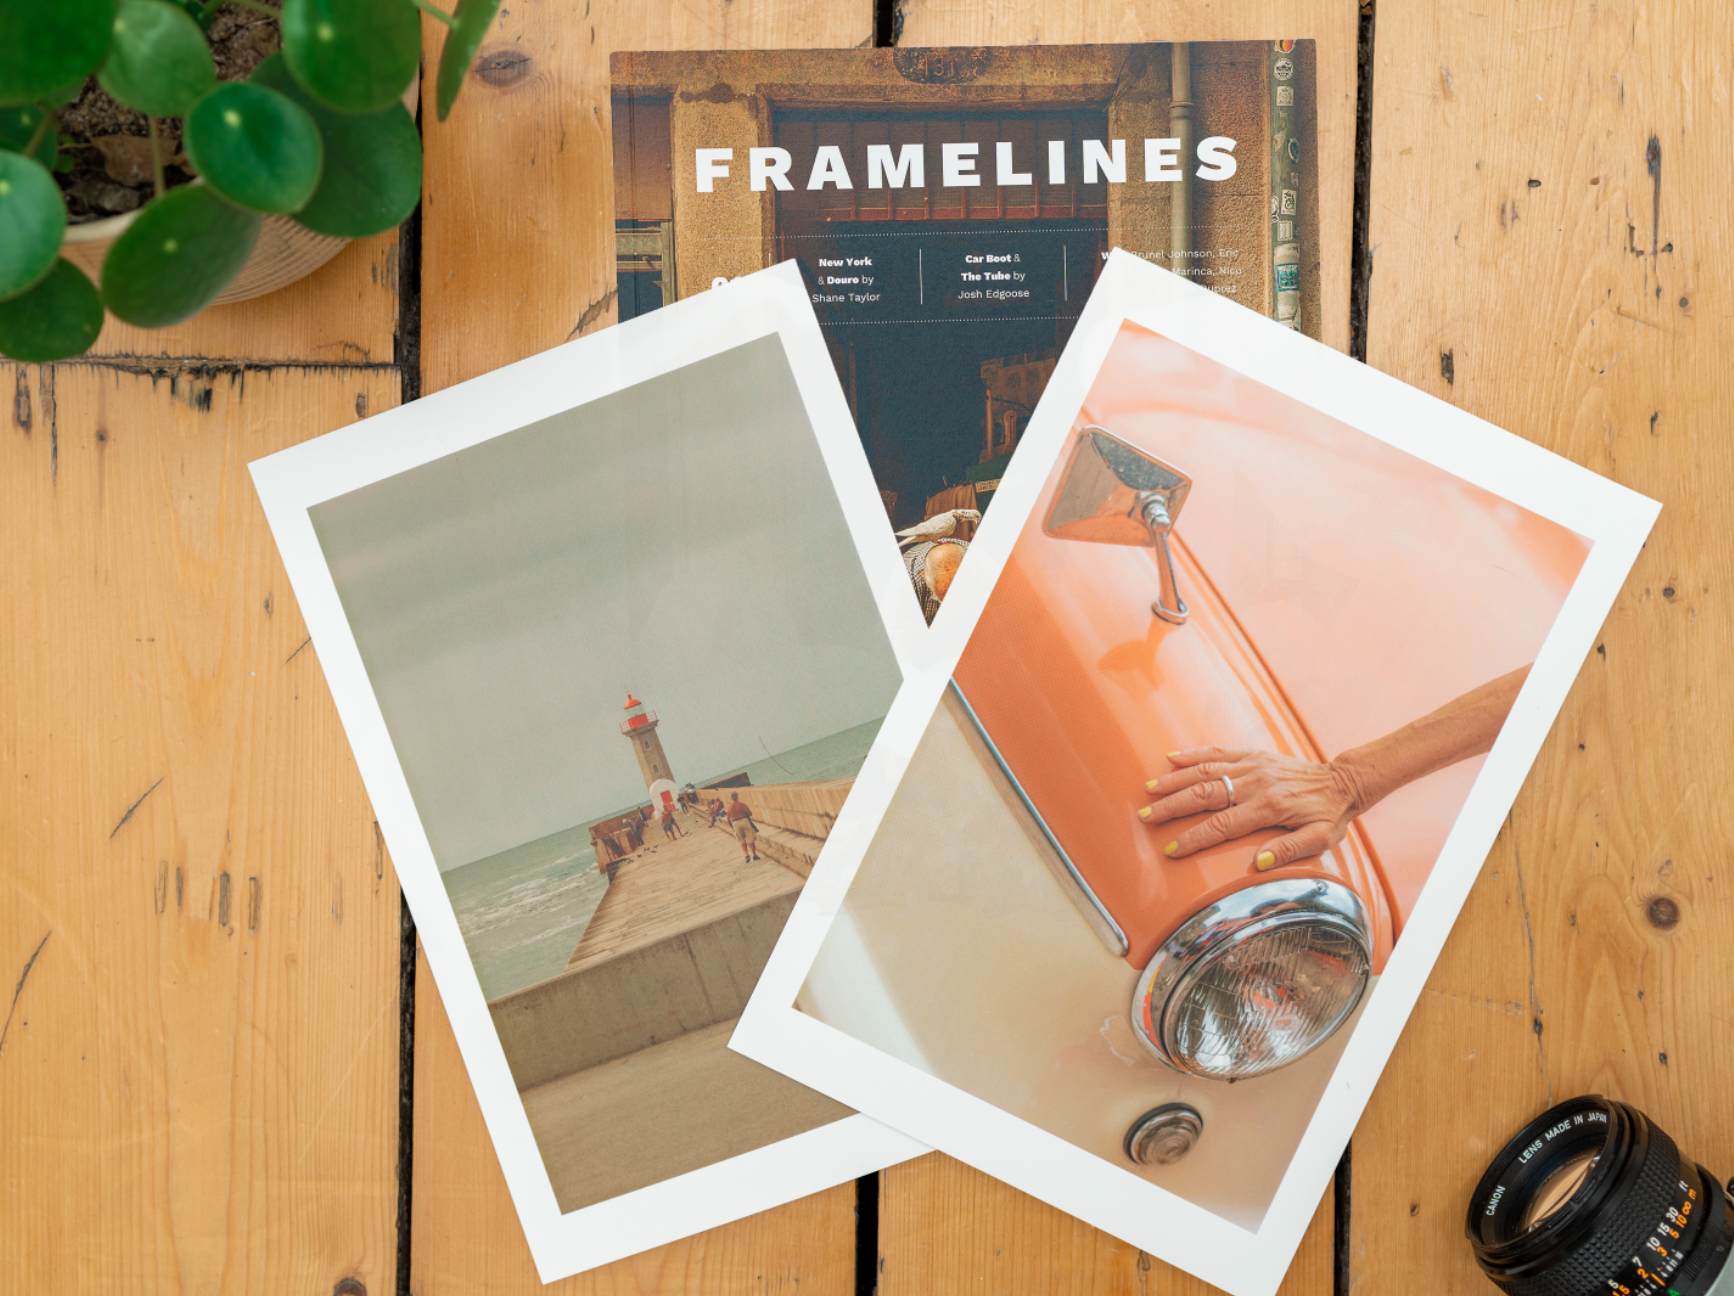 Framelines Magazine Issue 01 (with 2 Prints)